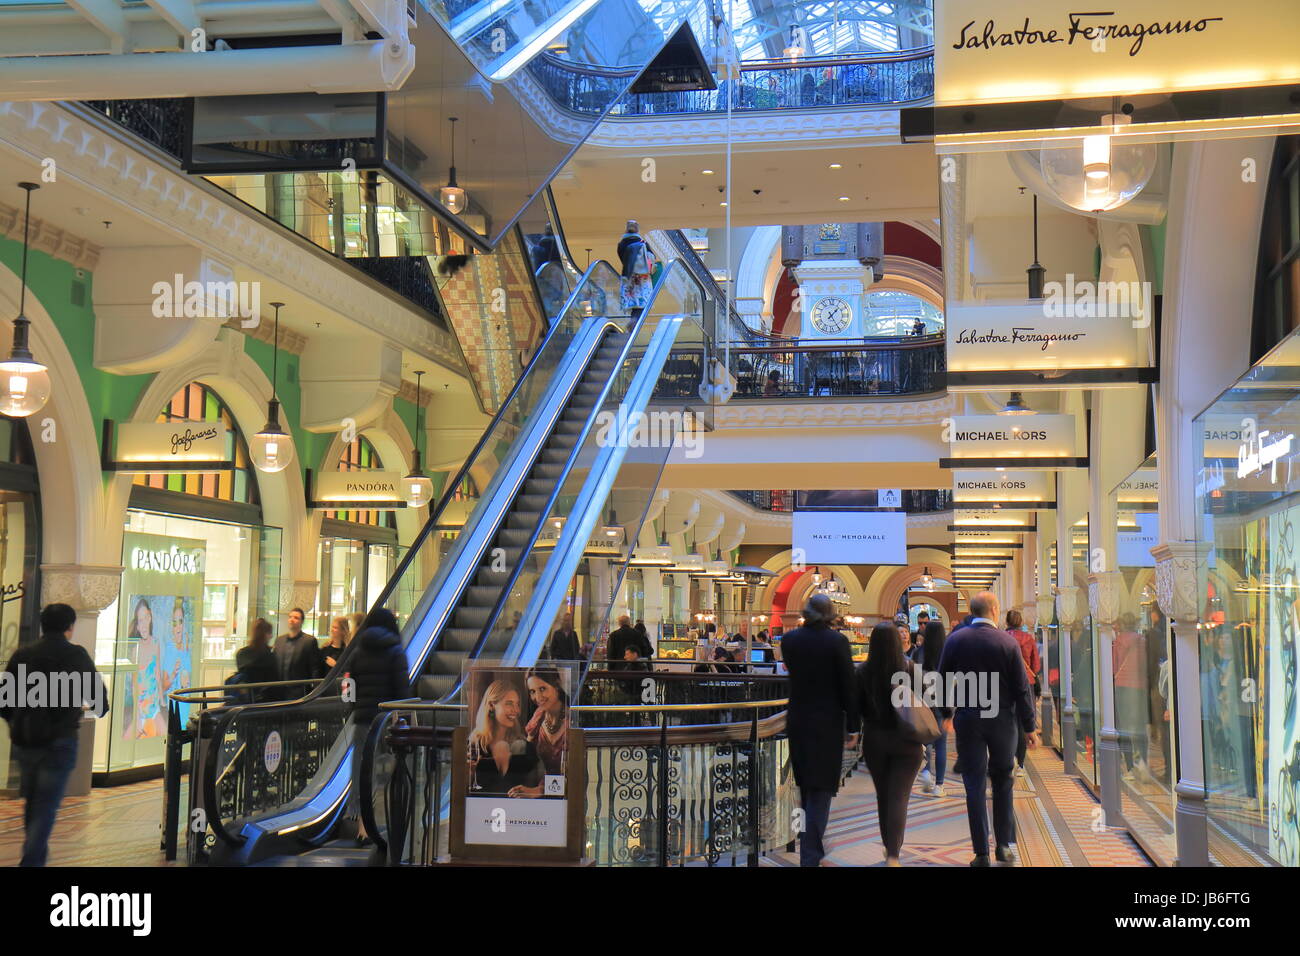 People visit Queen Victoria building historical shopping mall in Sydney Australia. Stock Photo